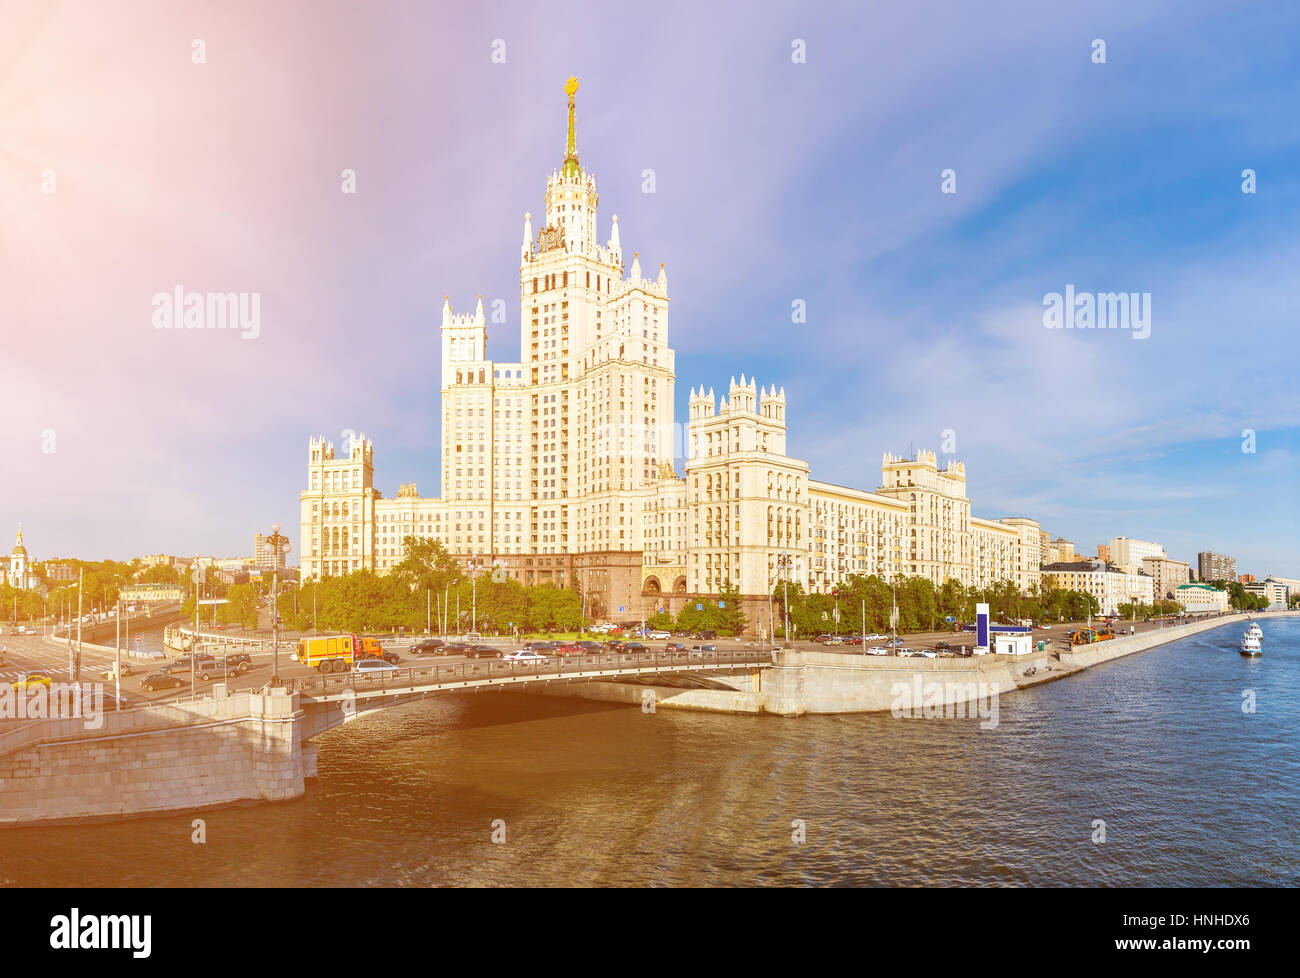 The stalinist skyscraper on the Kotelnicheskaya embankment in Moscow, Russia Stock Photo